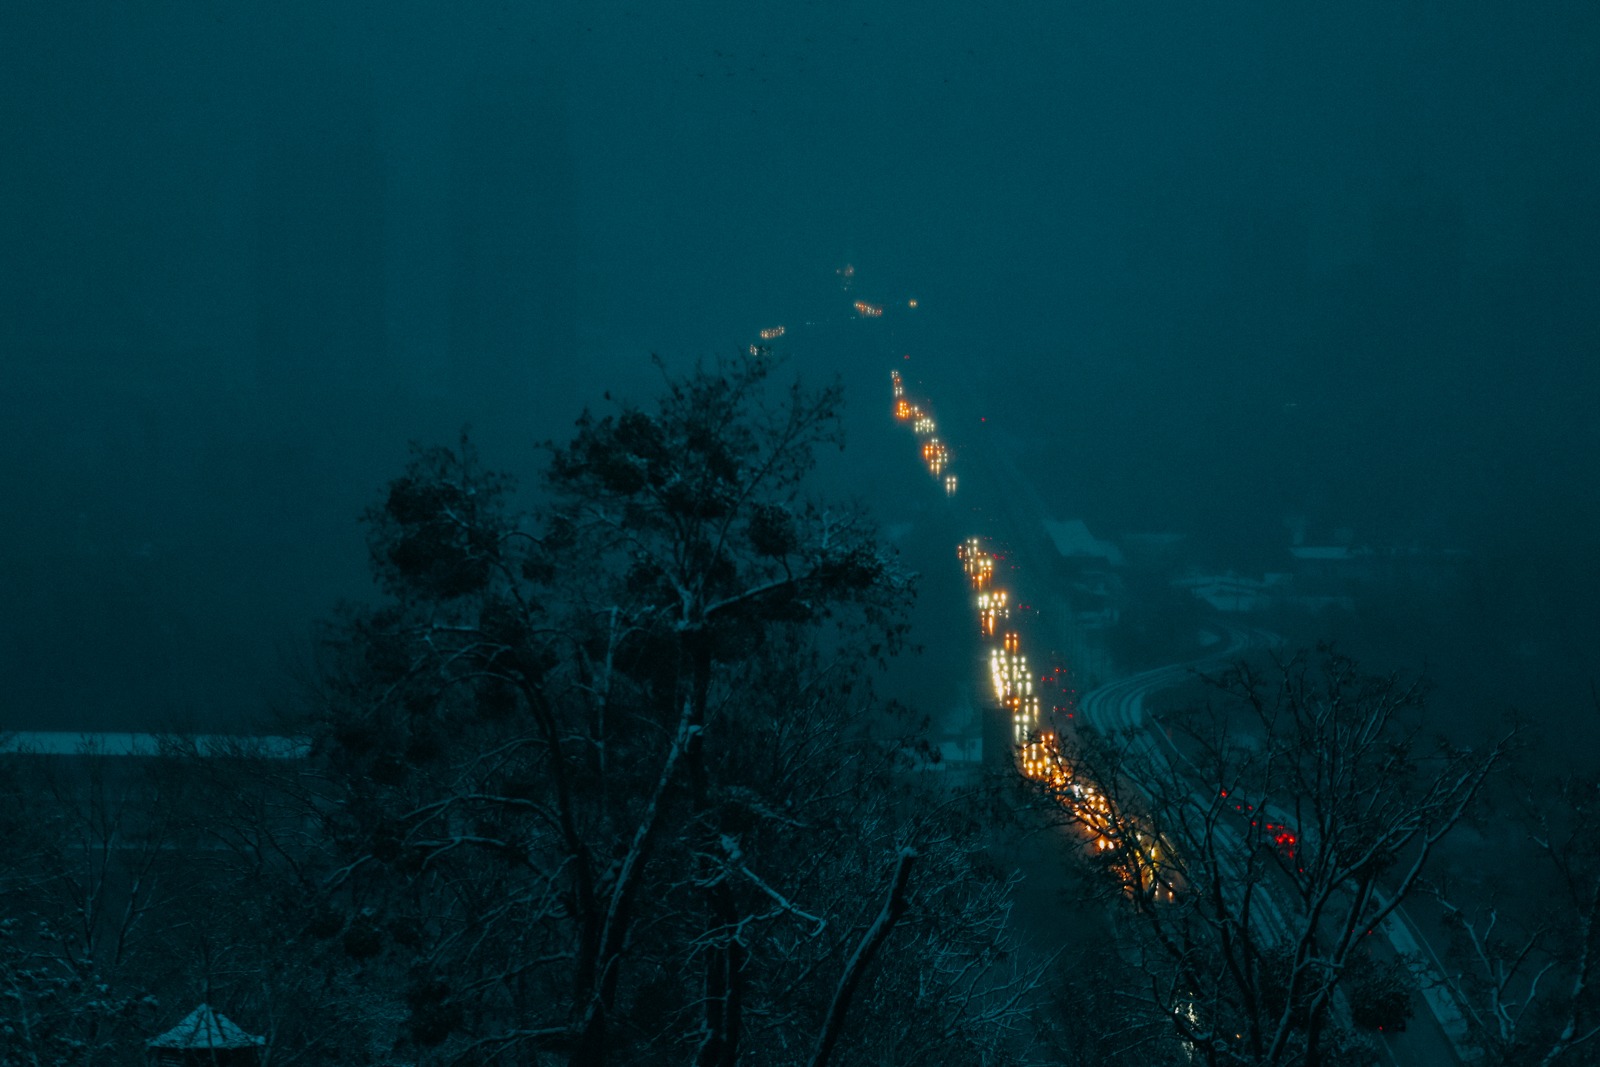 Cars move in the dark during electricity cuts off in Kyiv. Image by Serhii Ristenko